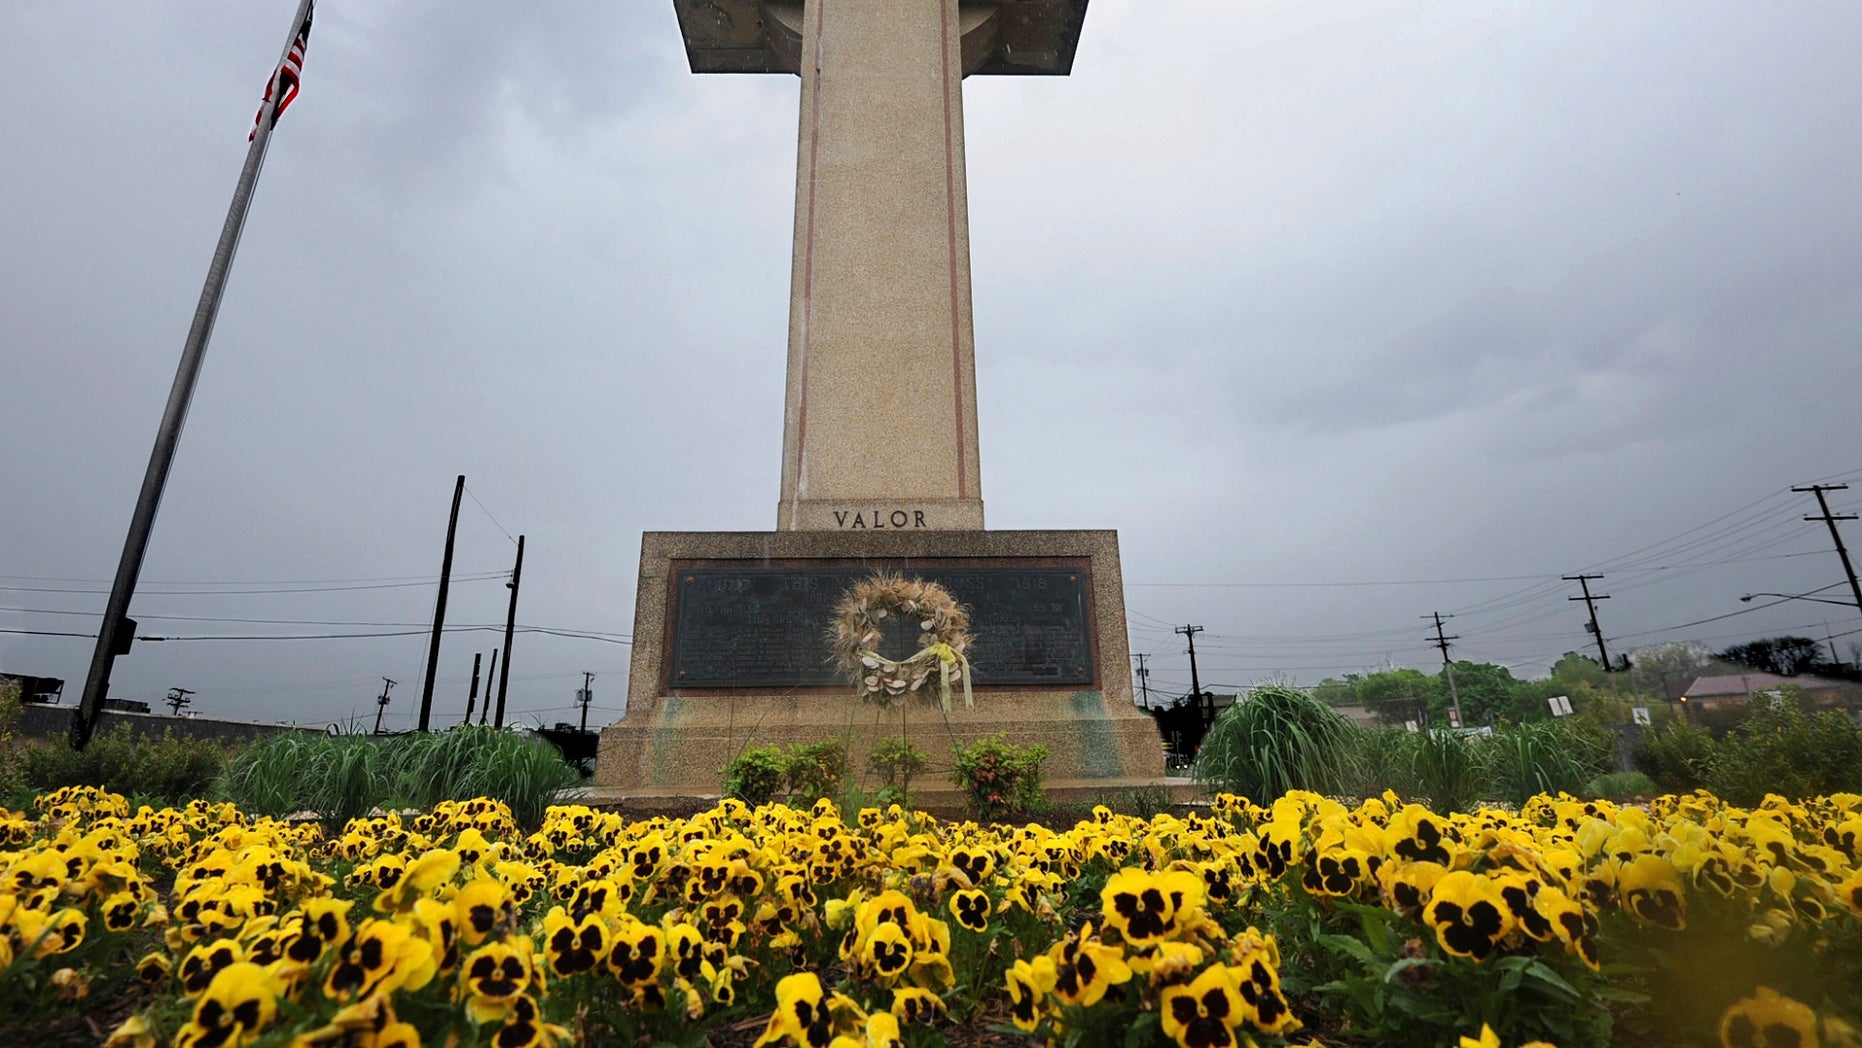 The case regarding the question of whether a cross-shaped Maryland war monument goes against the separation of church and state was accepted for final examination by the judges of the Supreme Court Friday. (Algerina Perna / The Baltimore Sun via AP, File)